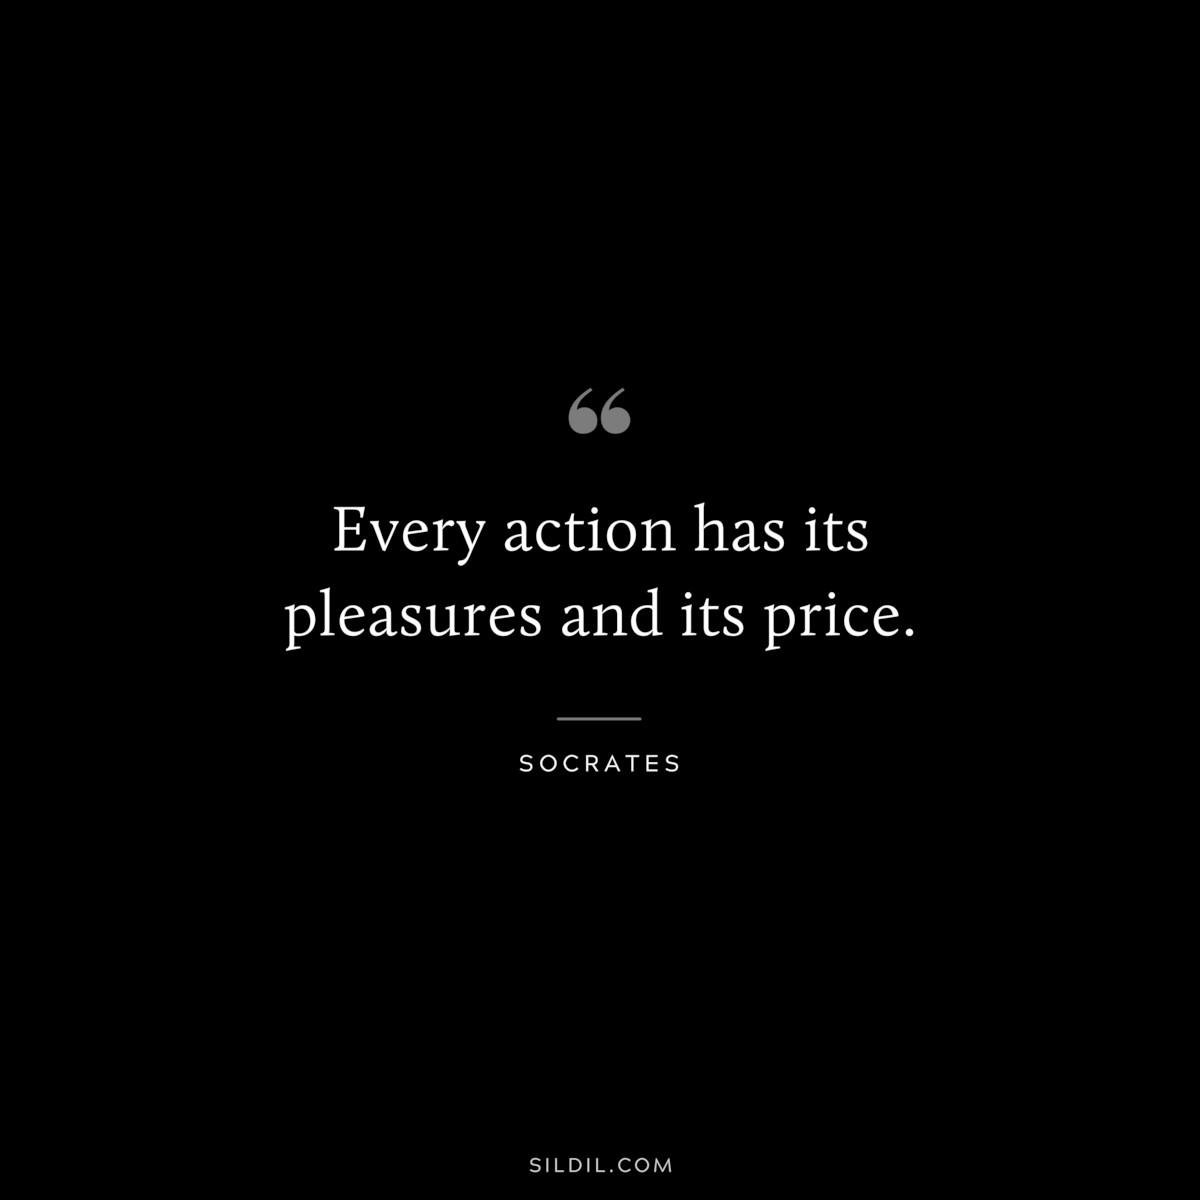 Every action has its pleasures and its price. ― Socrates